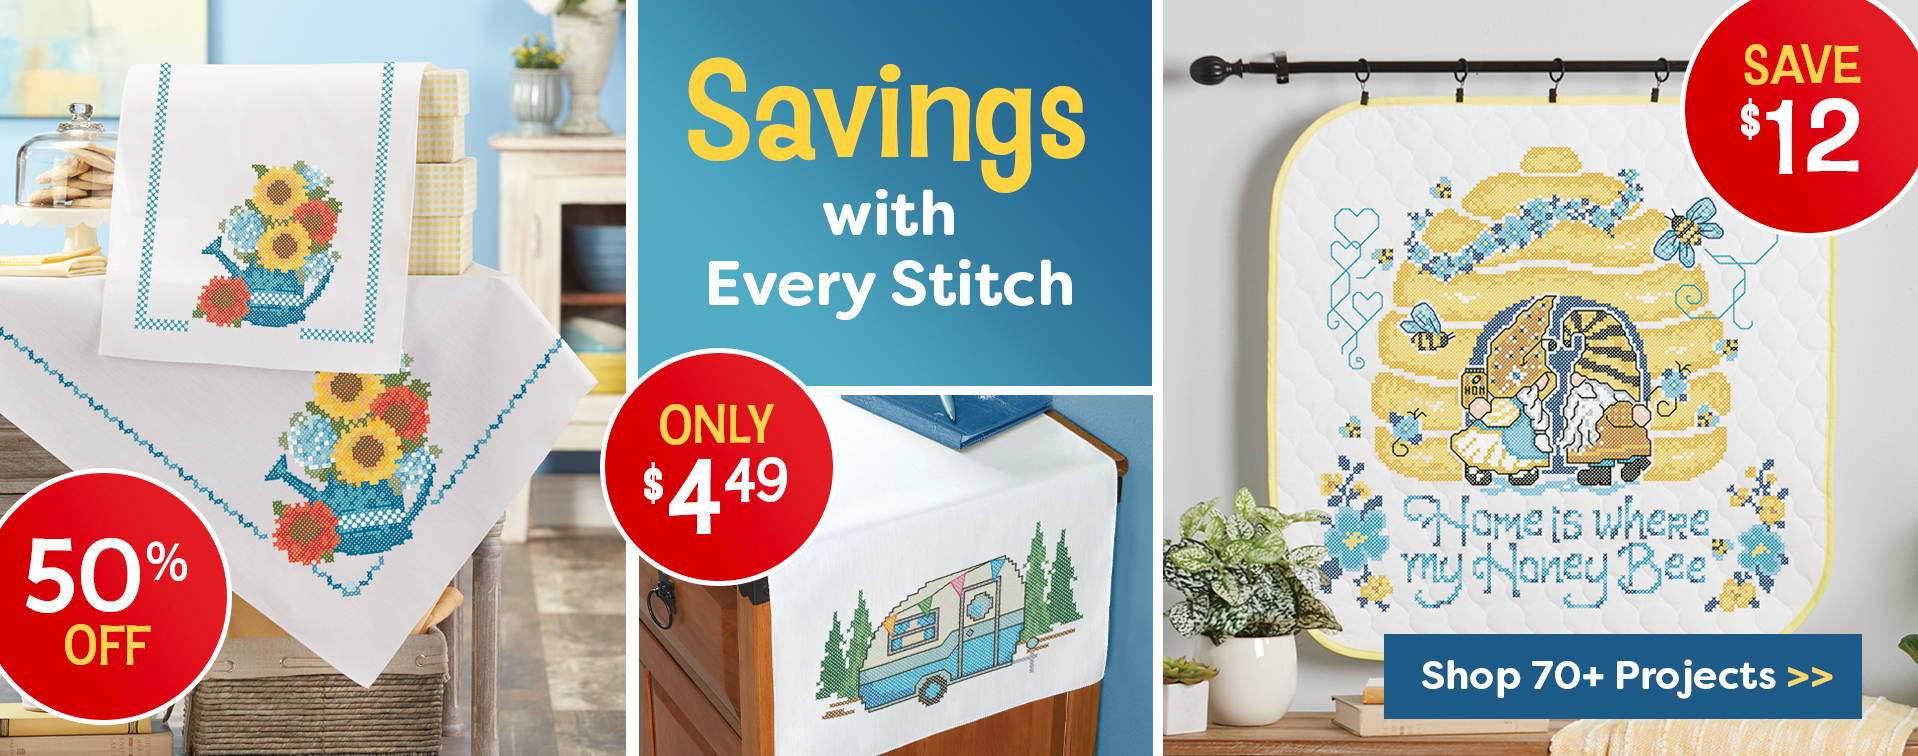 Savings with Every Stitch up to 50% off 70+ projects. Image: Selected sale projects.